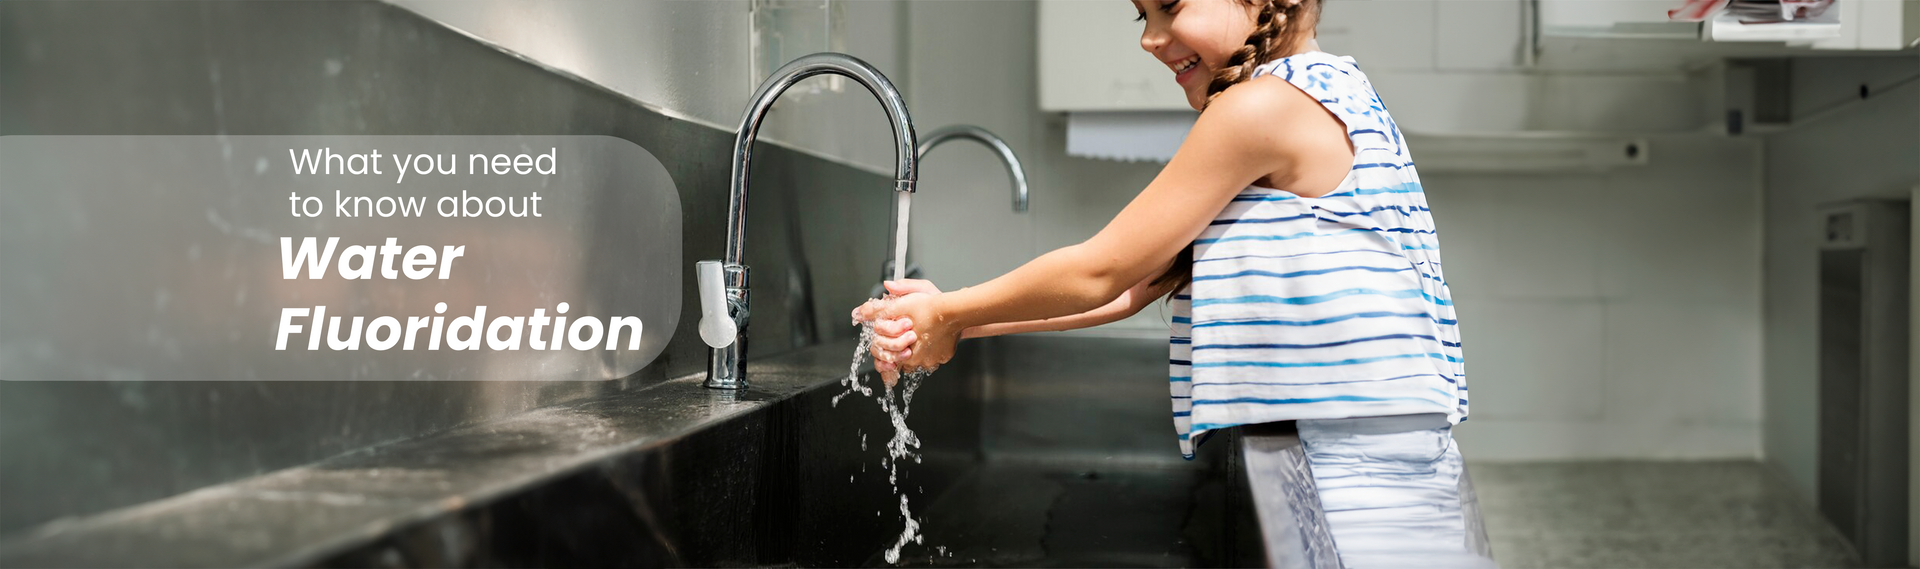 Fluoride is a fairly common element that naturally occurs in both water and plant life.